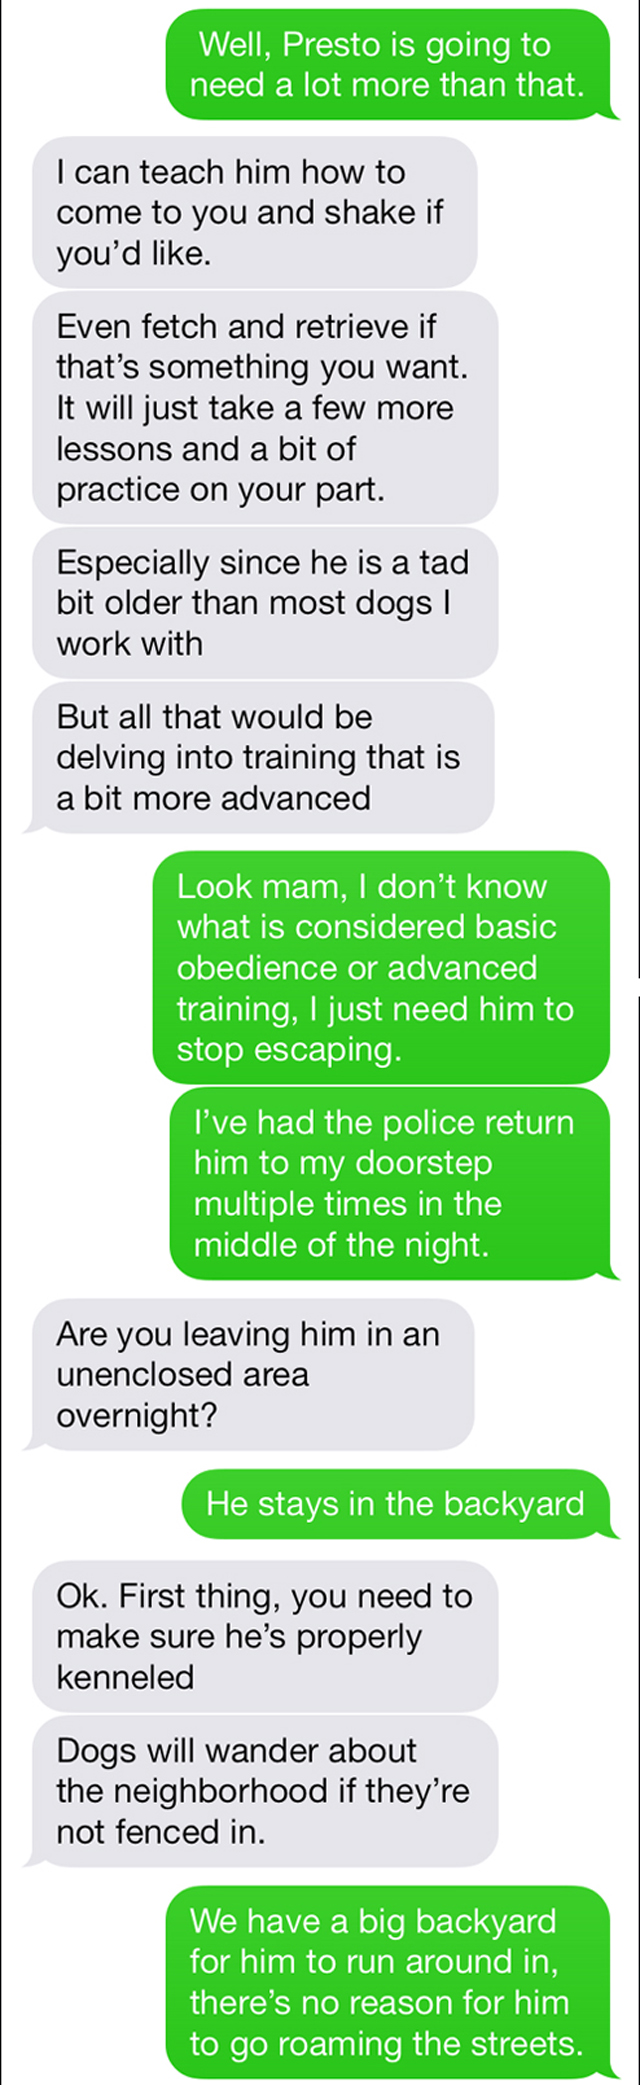 Funny dog trainer text troll